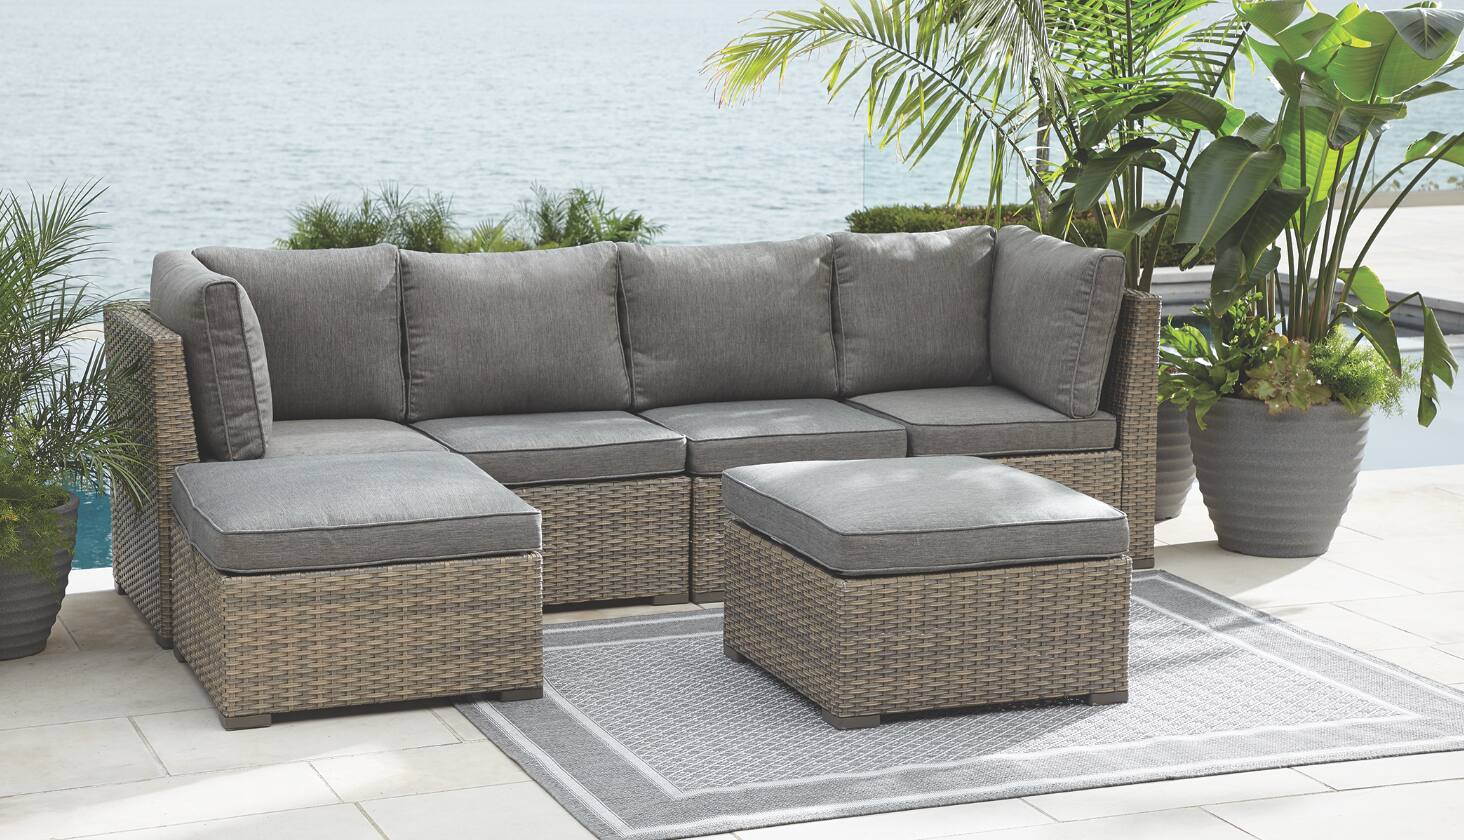 CANVAS Bala Sectional Patio Set, 6-Pc set in an outdoor space.